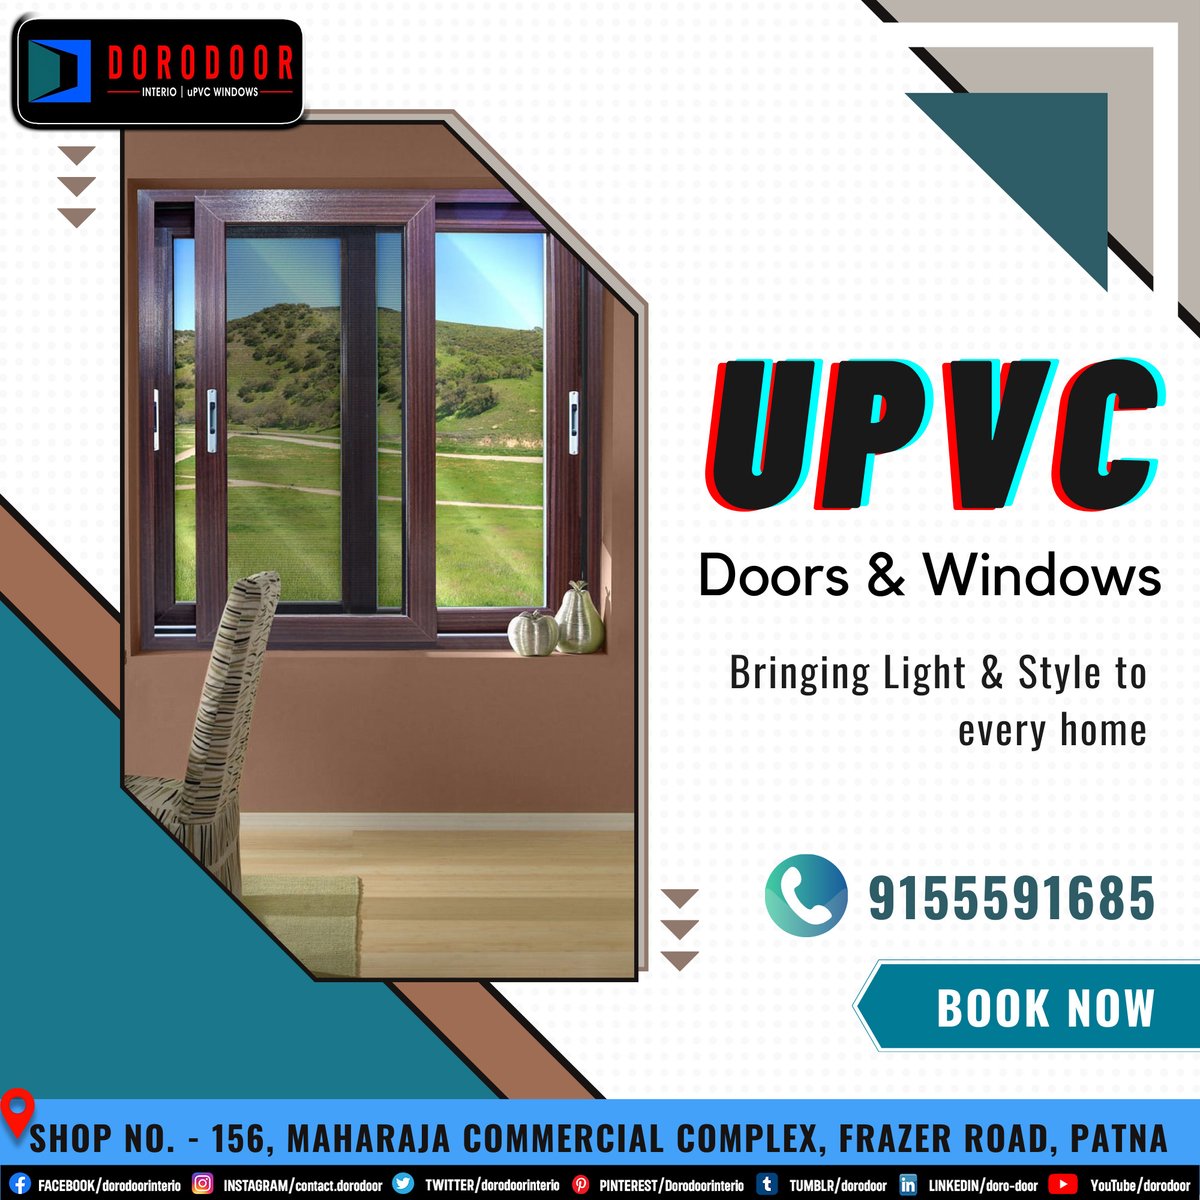 DORODOOR INTERIO dorodoor.com Why choose UPVC?Our doors are eco-friendly, energy-efficient, and low-maintenance, promising a sustainable and hassle-free experience for years to come. #scratchlesswindows #dorodoorinterio #upvcprotected #patnabusiness #biharbusiness